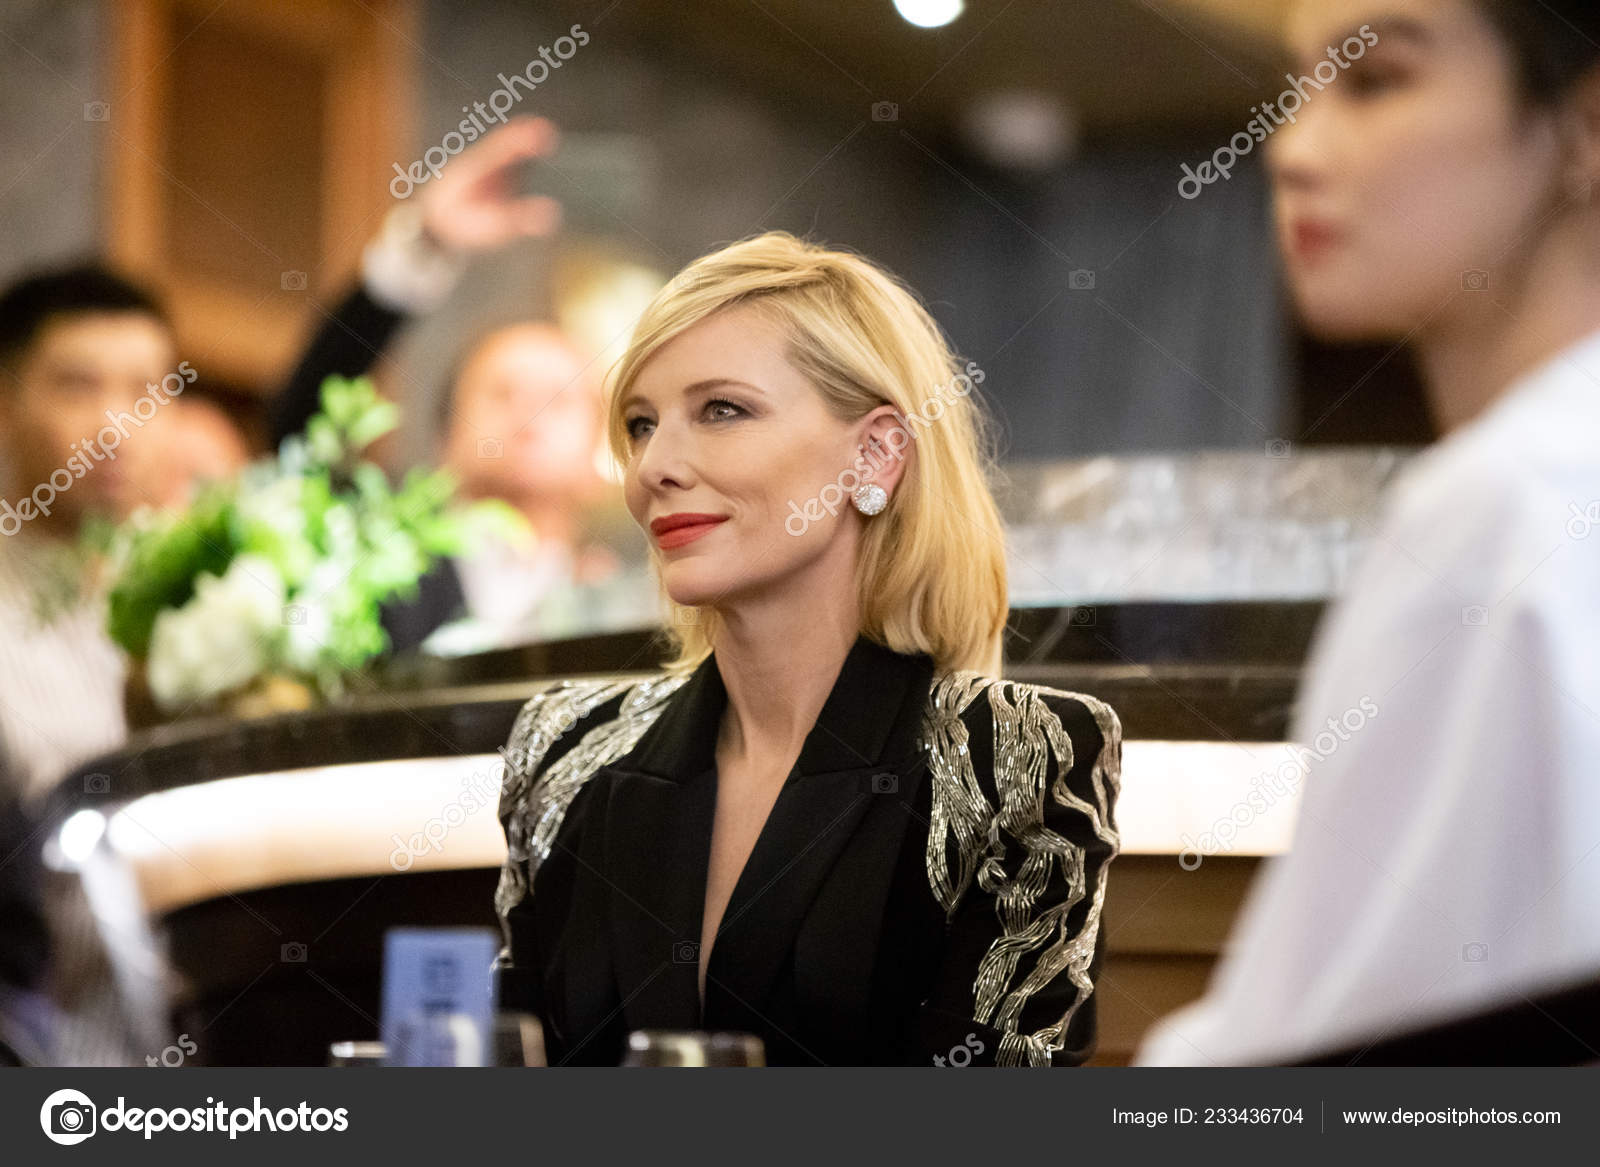 Australian Actress Cate Blanchett Attends Promotional Event Iwc Shanghai China – Editorial Photo © ChinaImages #233436704